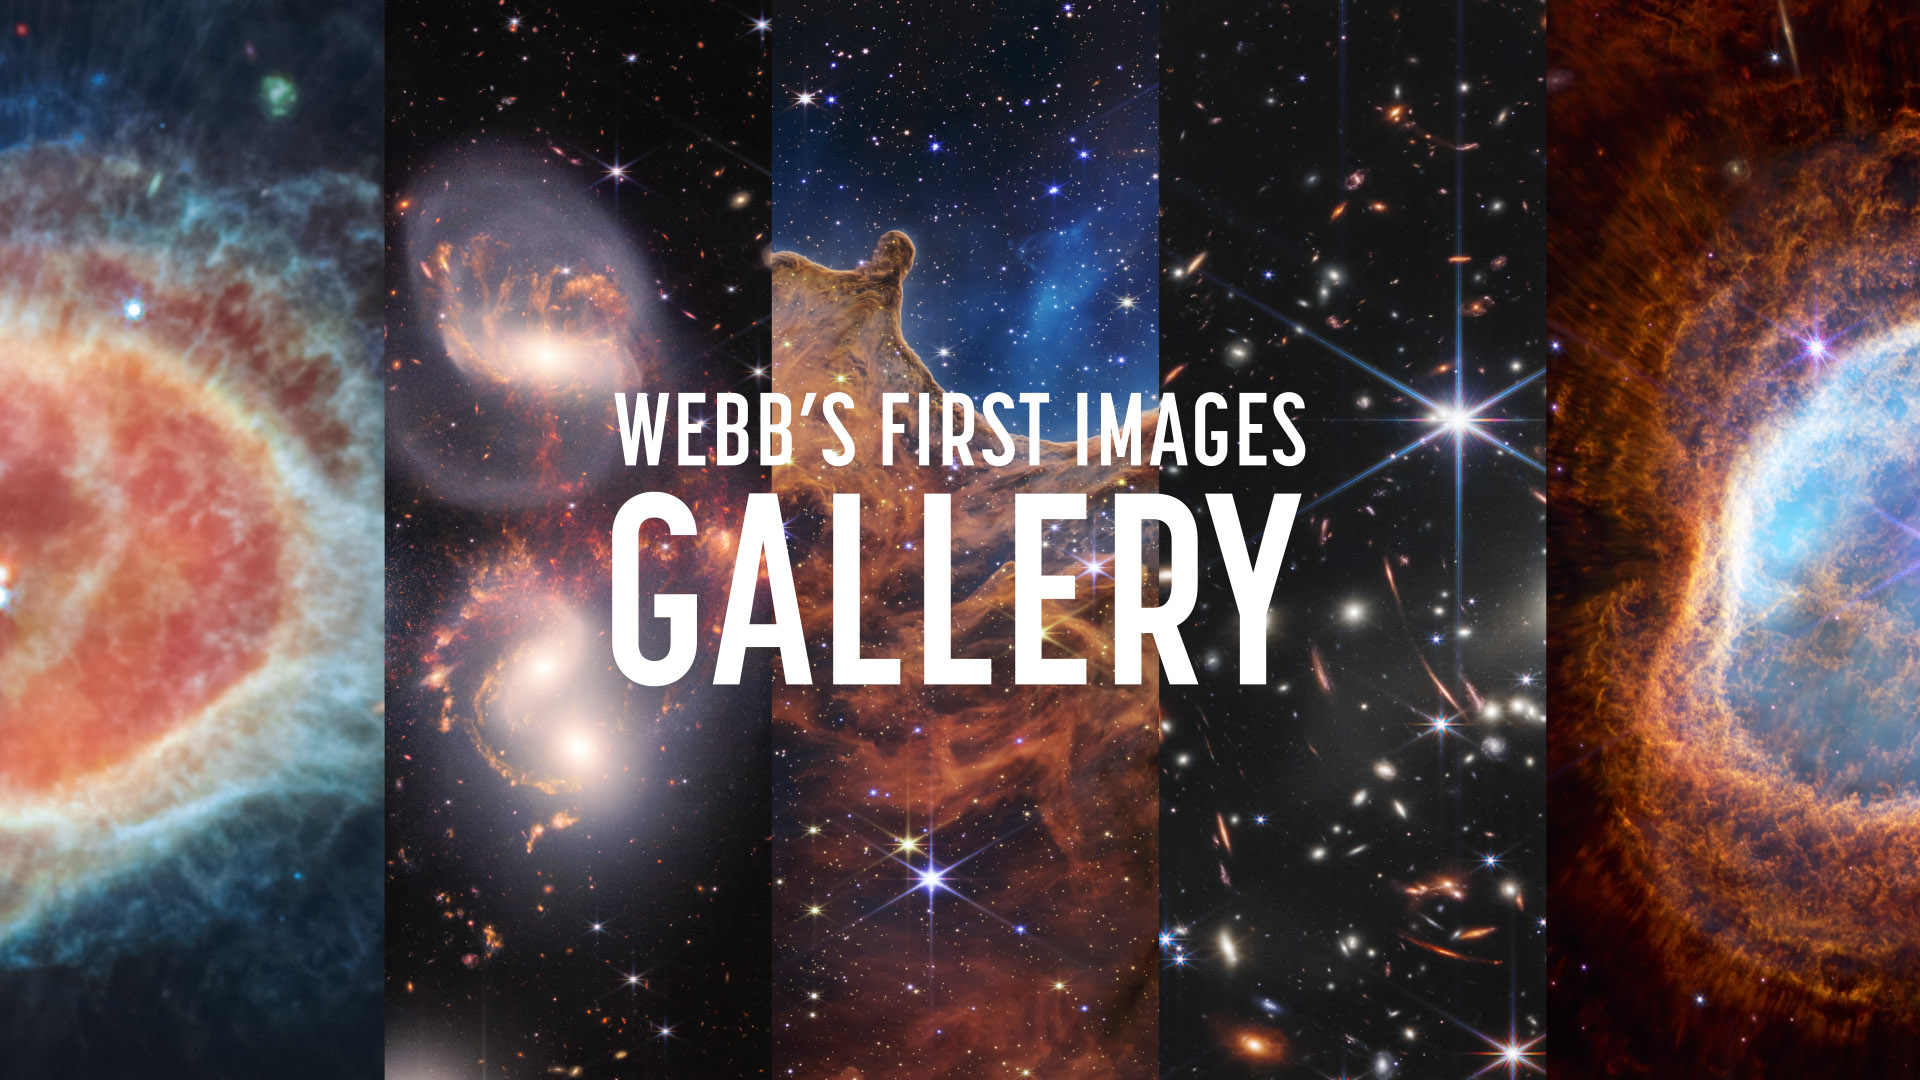 NASA releases first images captured by its most advanced James Webb telescope